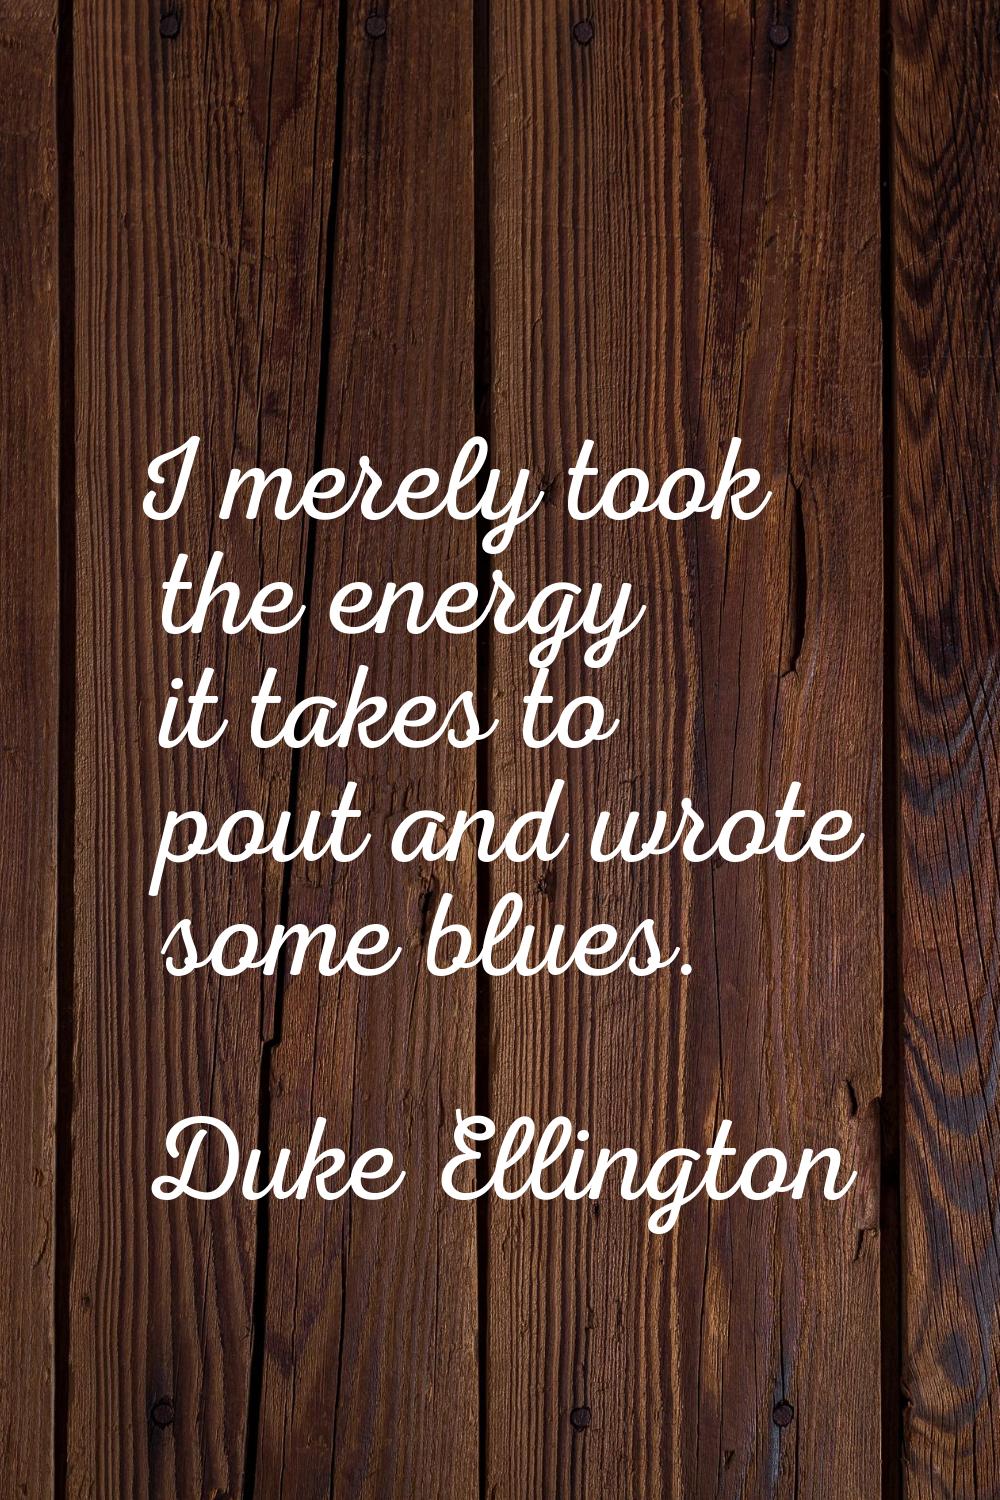 I merely took the energy it takes to pout and wrote some blues.